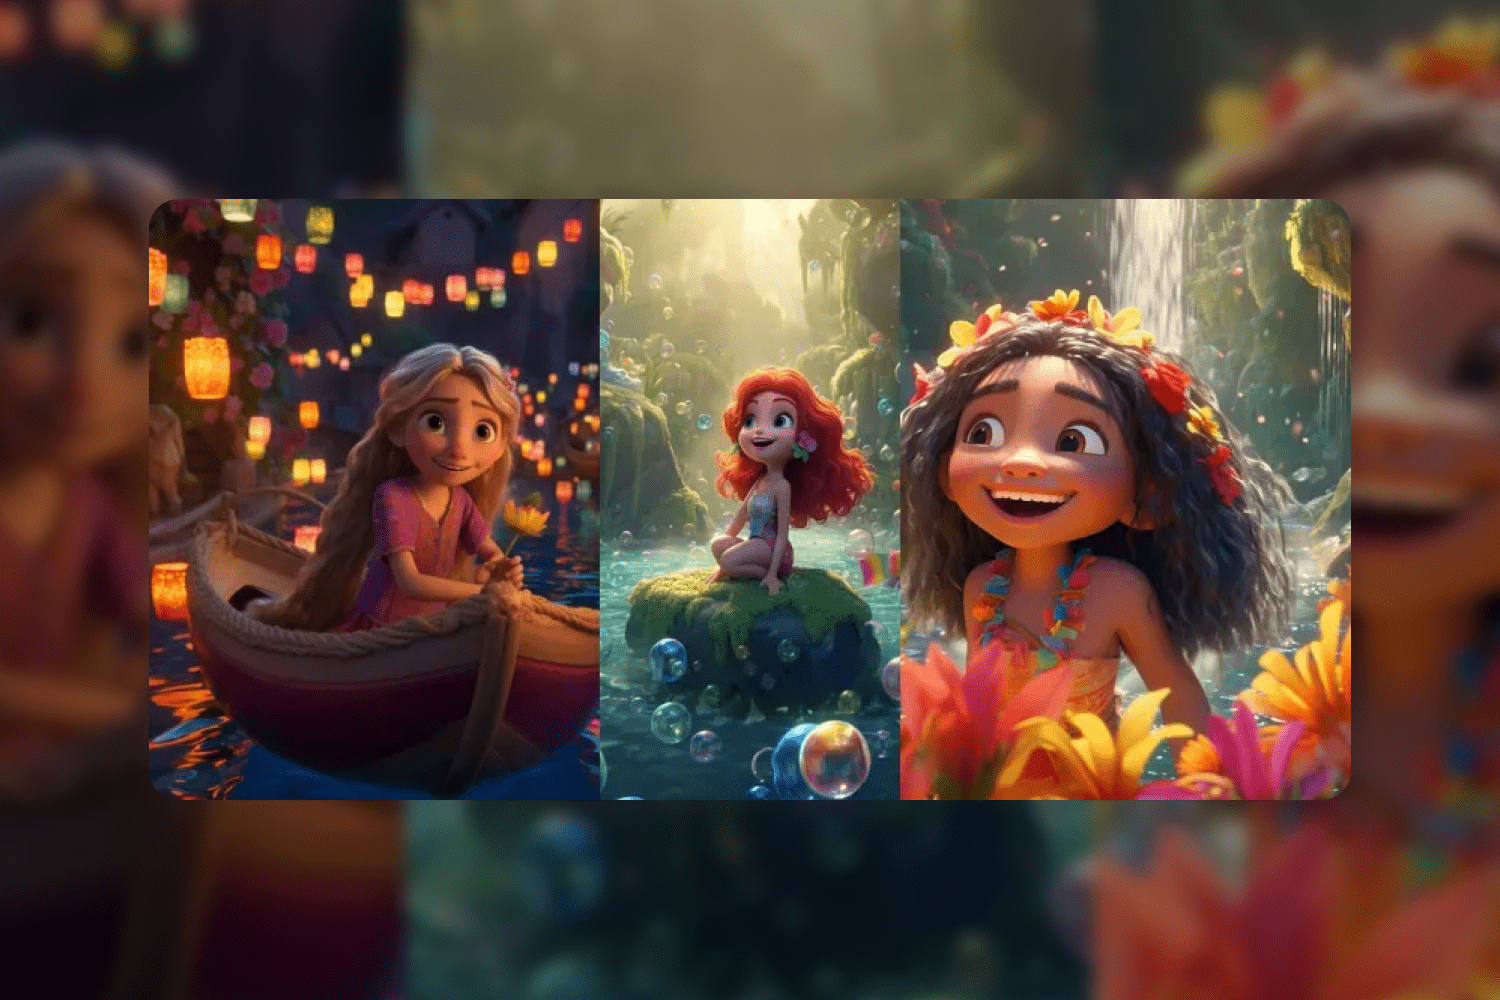 Collage of drawings of smiling girls in the style of Disney princesses.